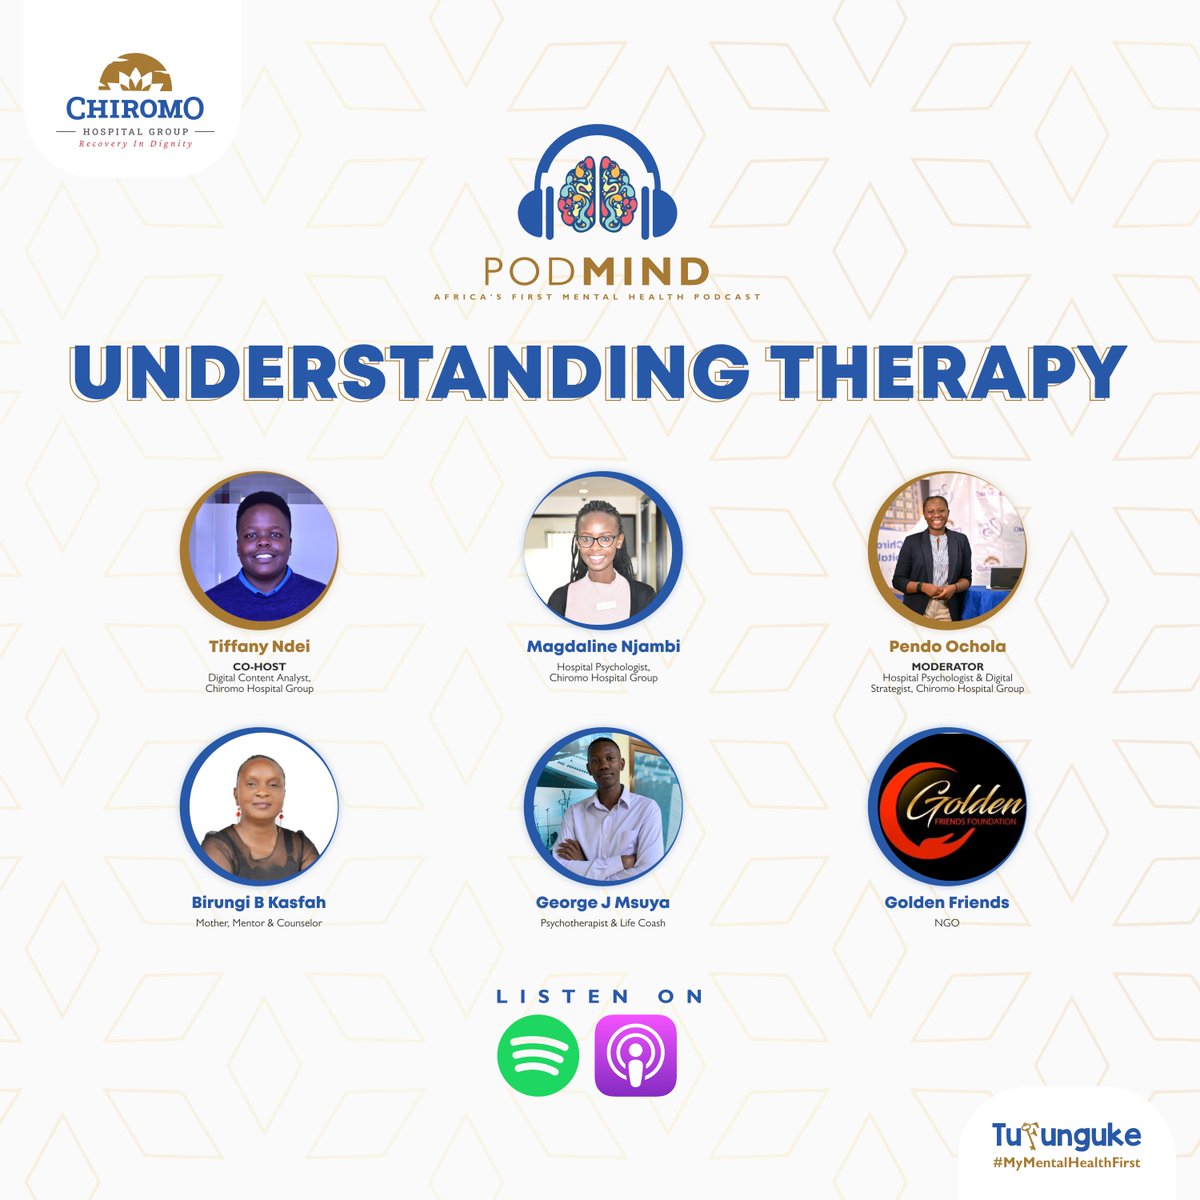 Uncover the power of therapy in our latest Podmind episode on 'Understanding Therapy' (Twitter Spaces Edition) Gain insights, break stigmas, and ignite personal growth. Listen now on your favorite podcast platform: anchor.fm/chiromo-hospit… #Tufunguke